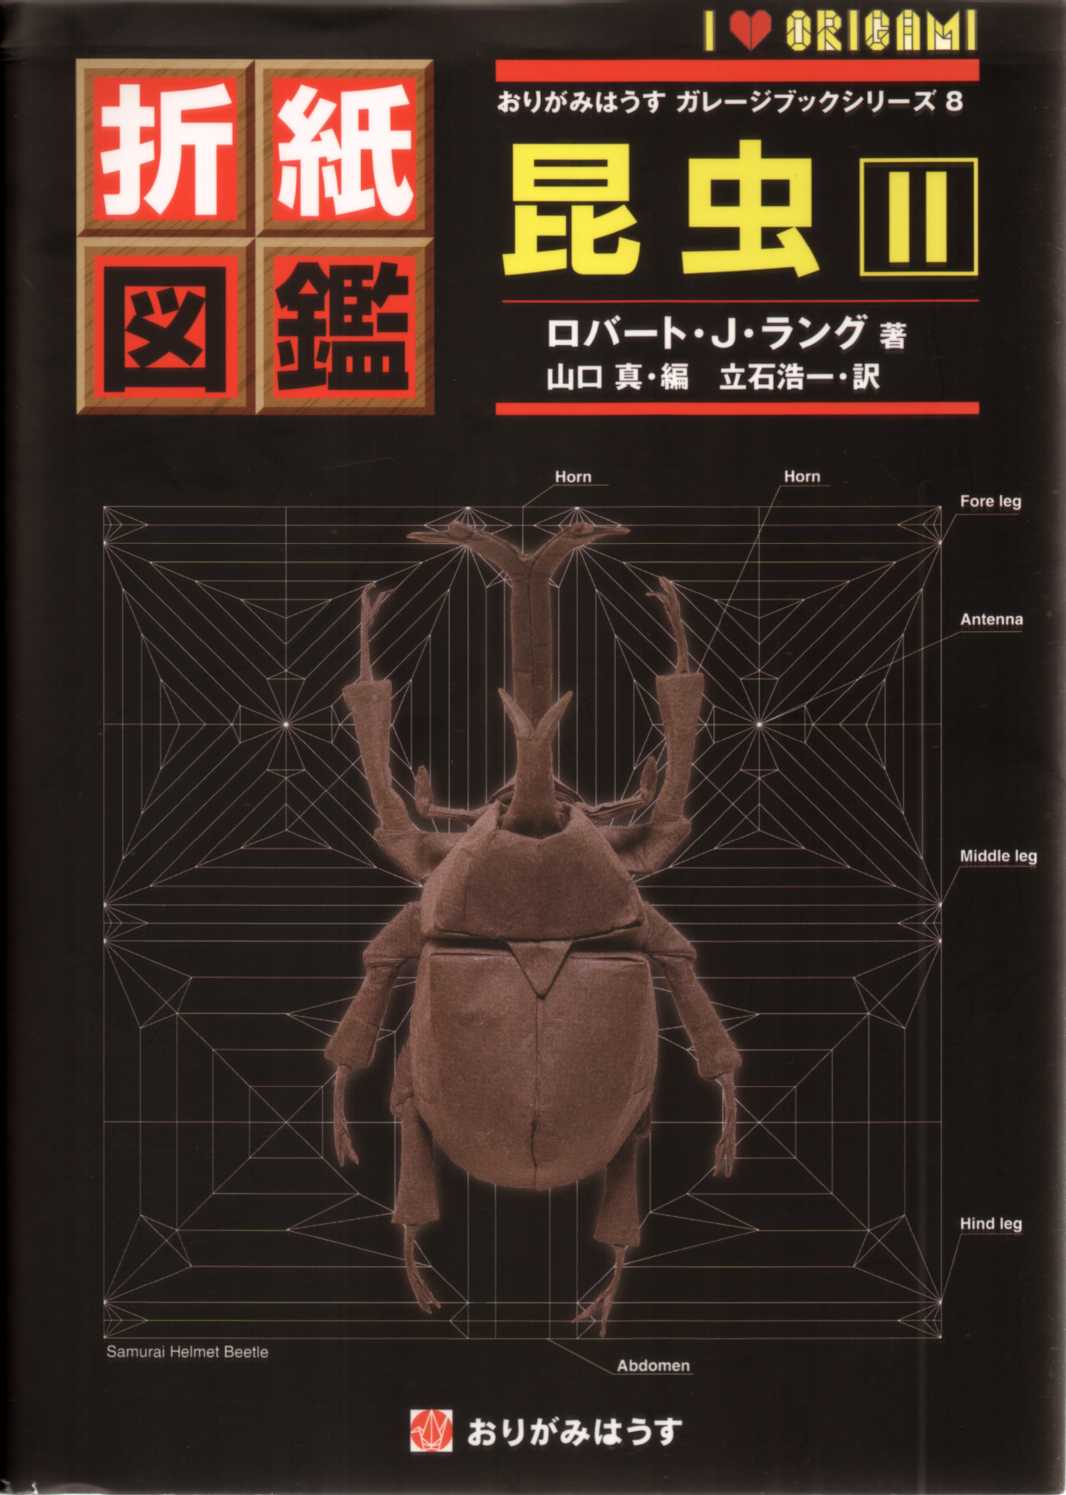 Origami Insects II / 折紙図鑑　昆虫・2 : page 141.